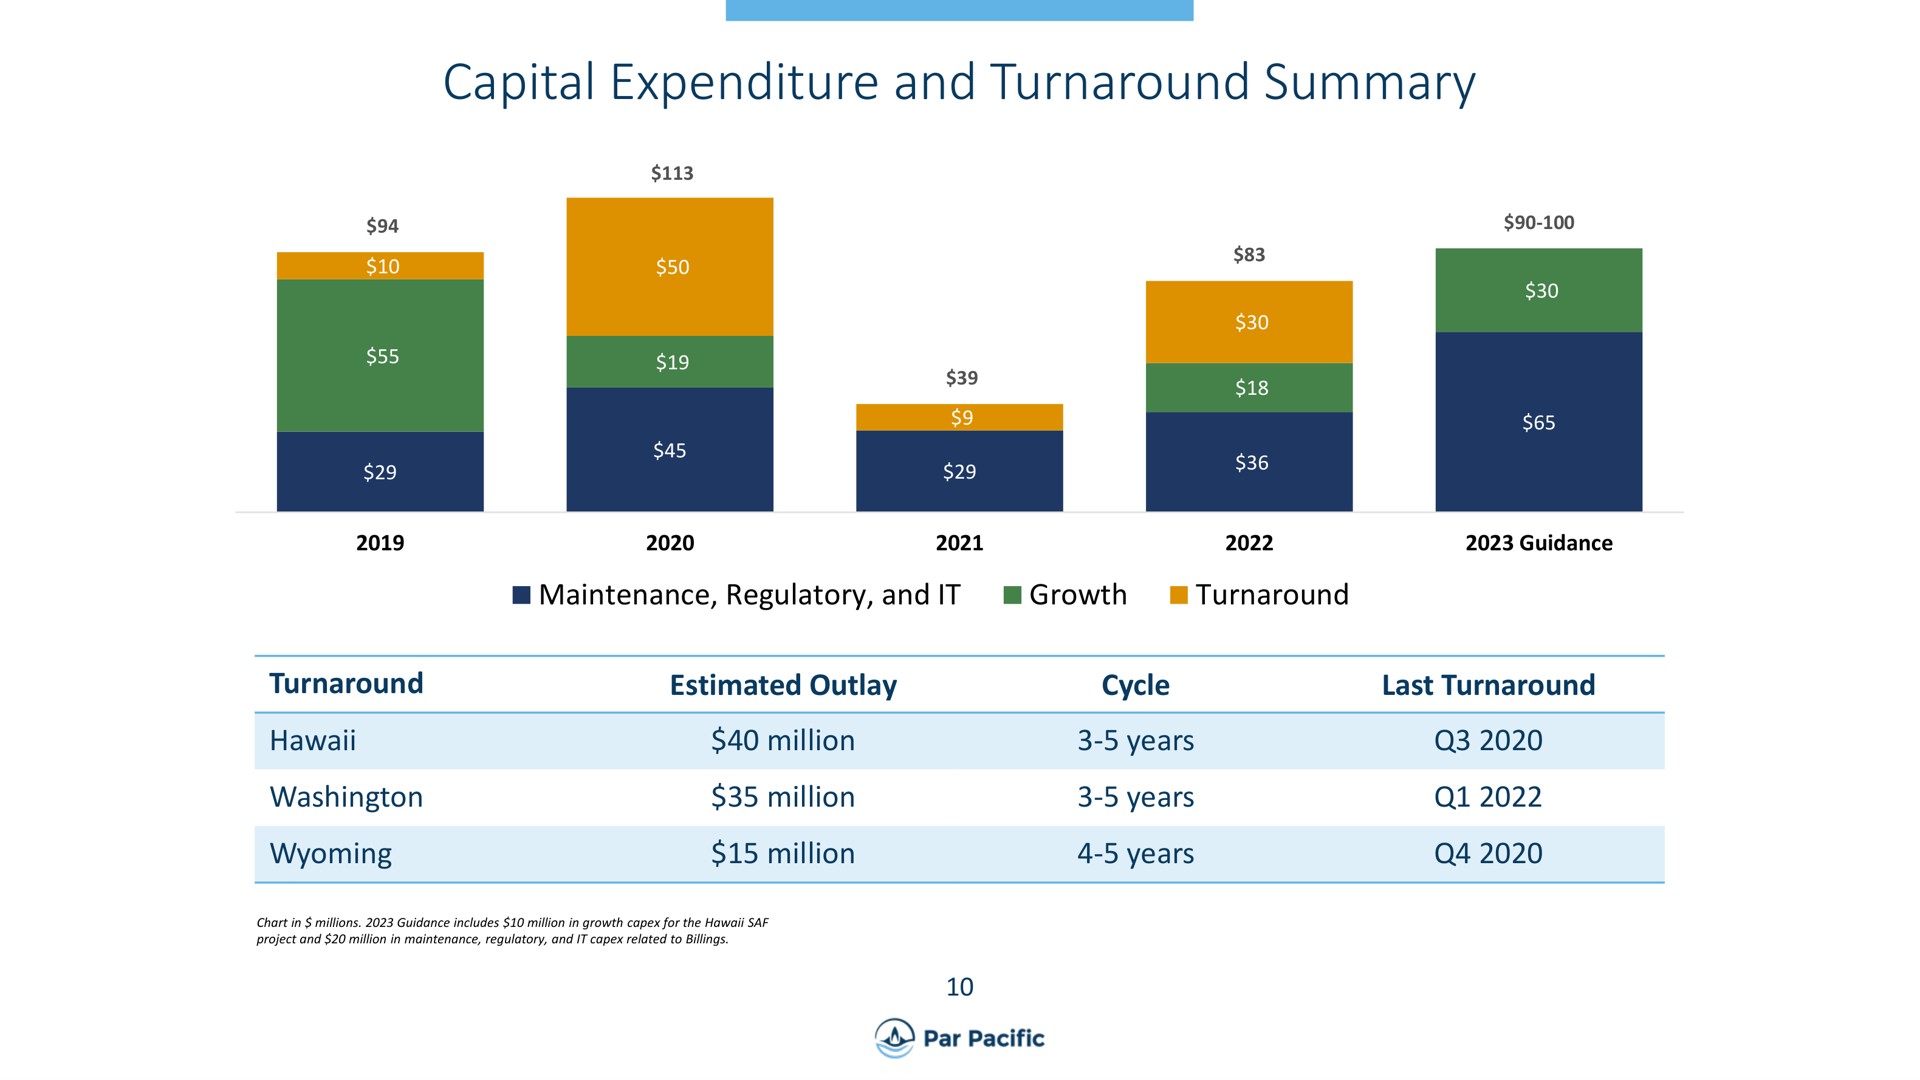 capital expenditure and turnaround summary | Par Pacific